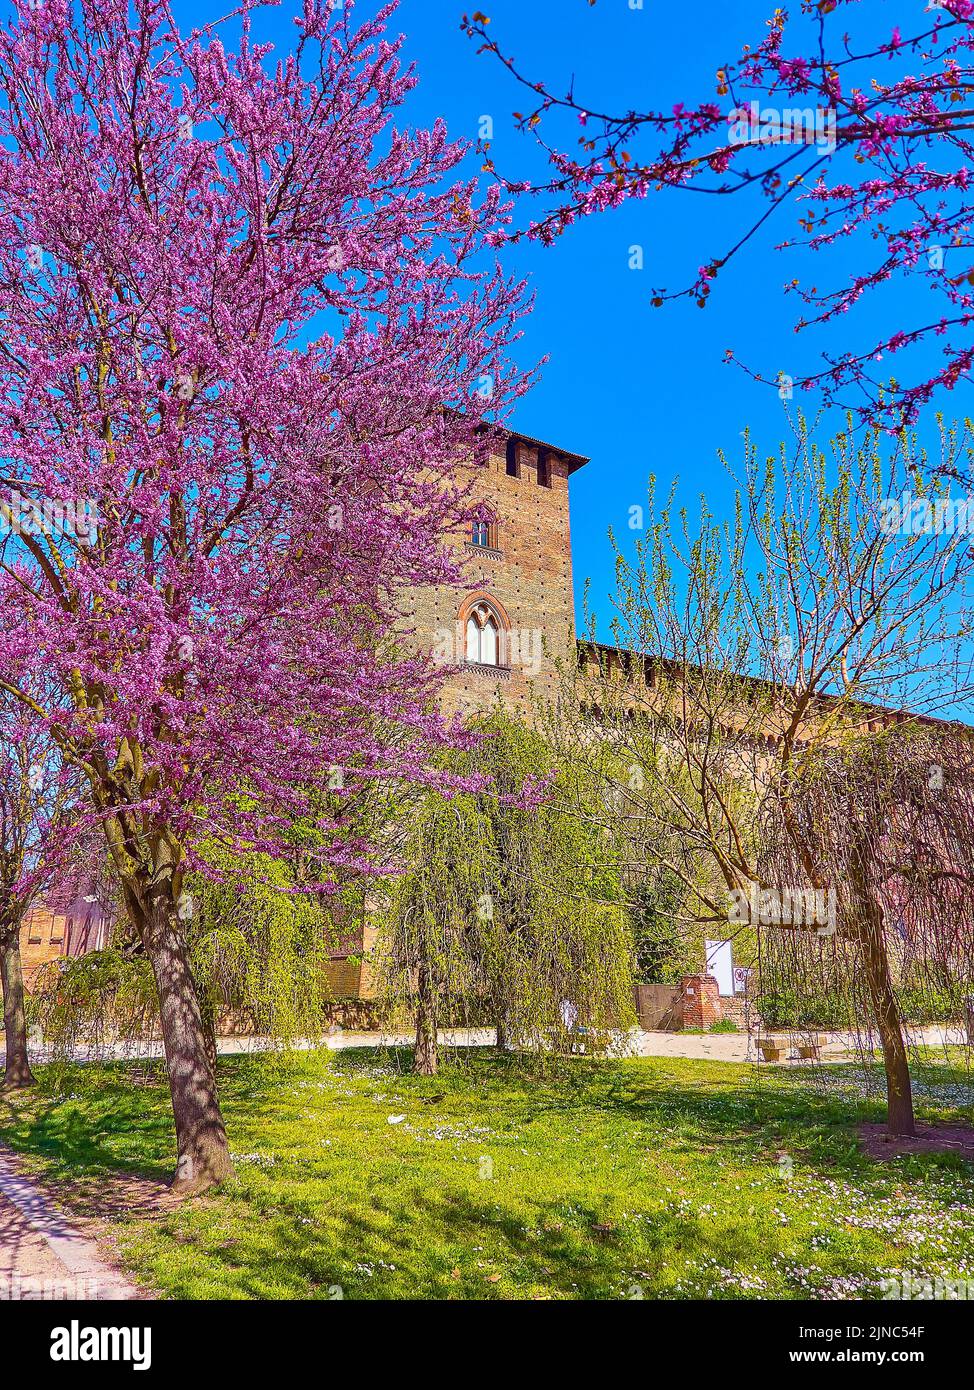 Enjoy great view on Visconti Castle and blooming trees in its park, Pavia, Italy Stock Photo